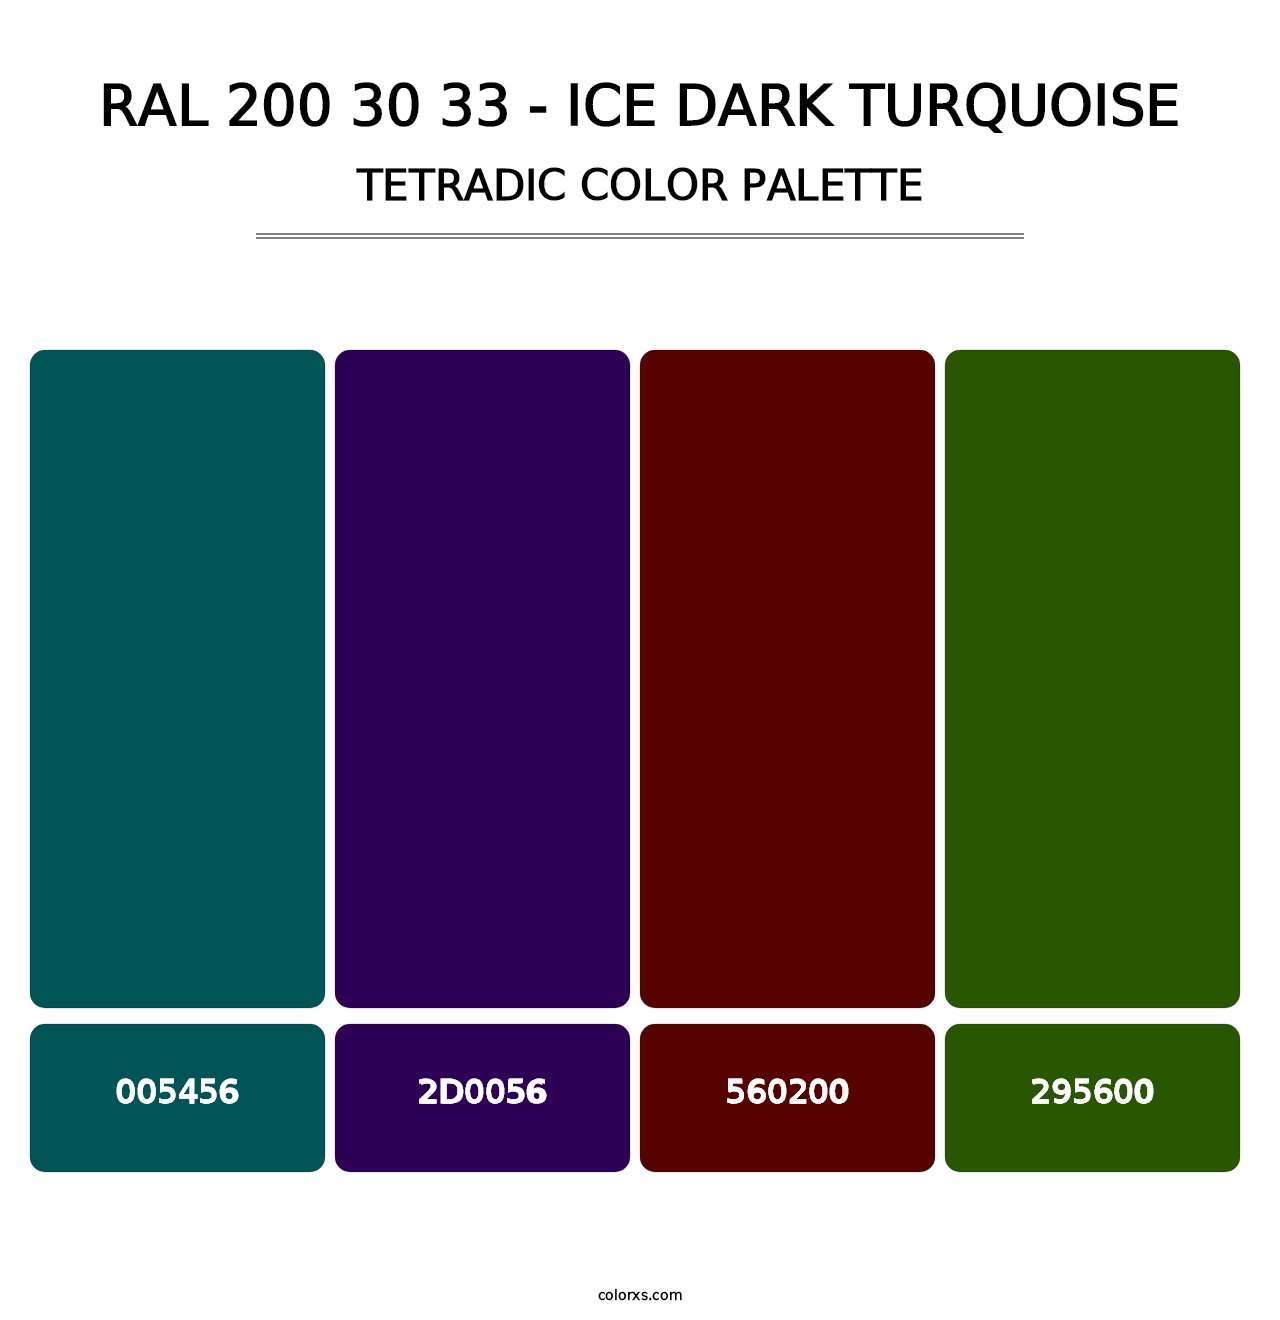 RAL 200 30 33 - Ice Dark Turquoise - Tetradic Color Palette